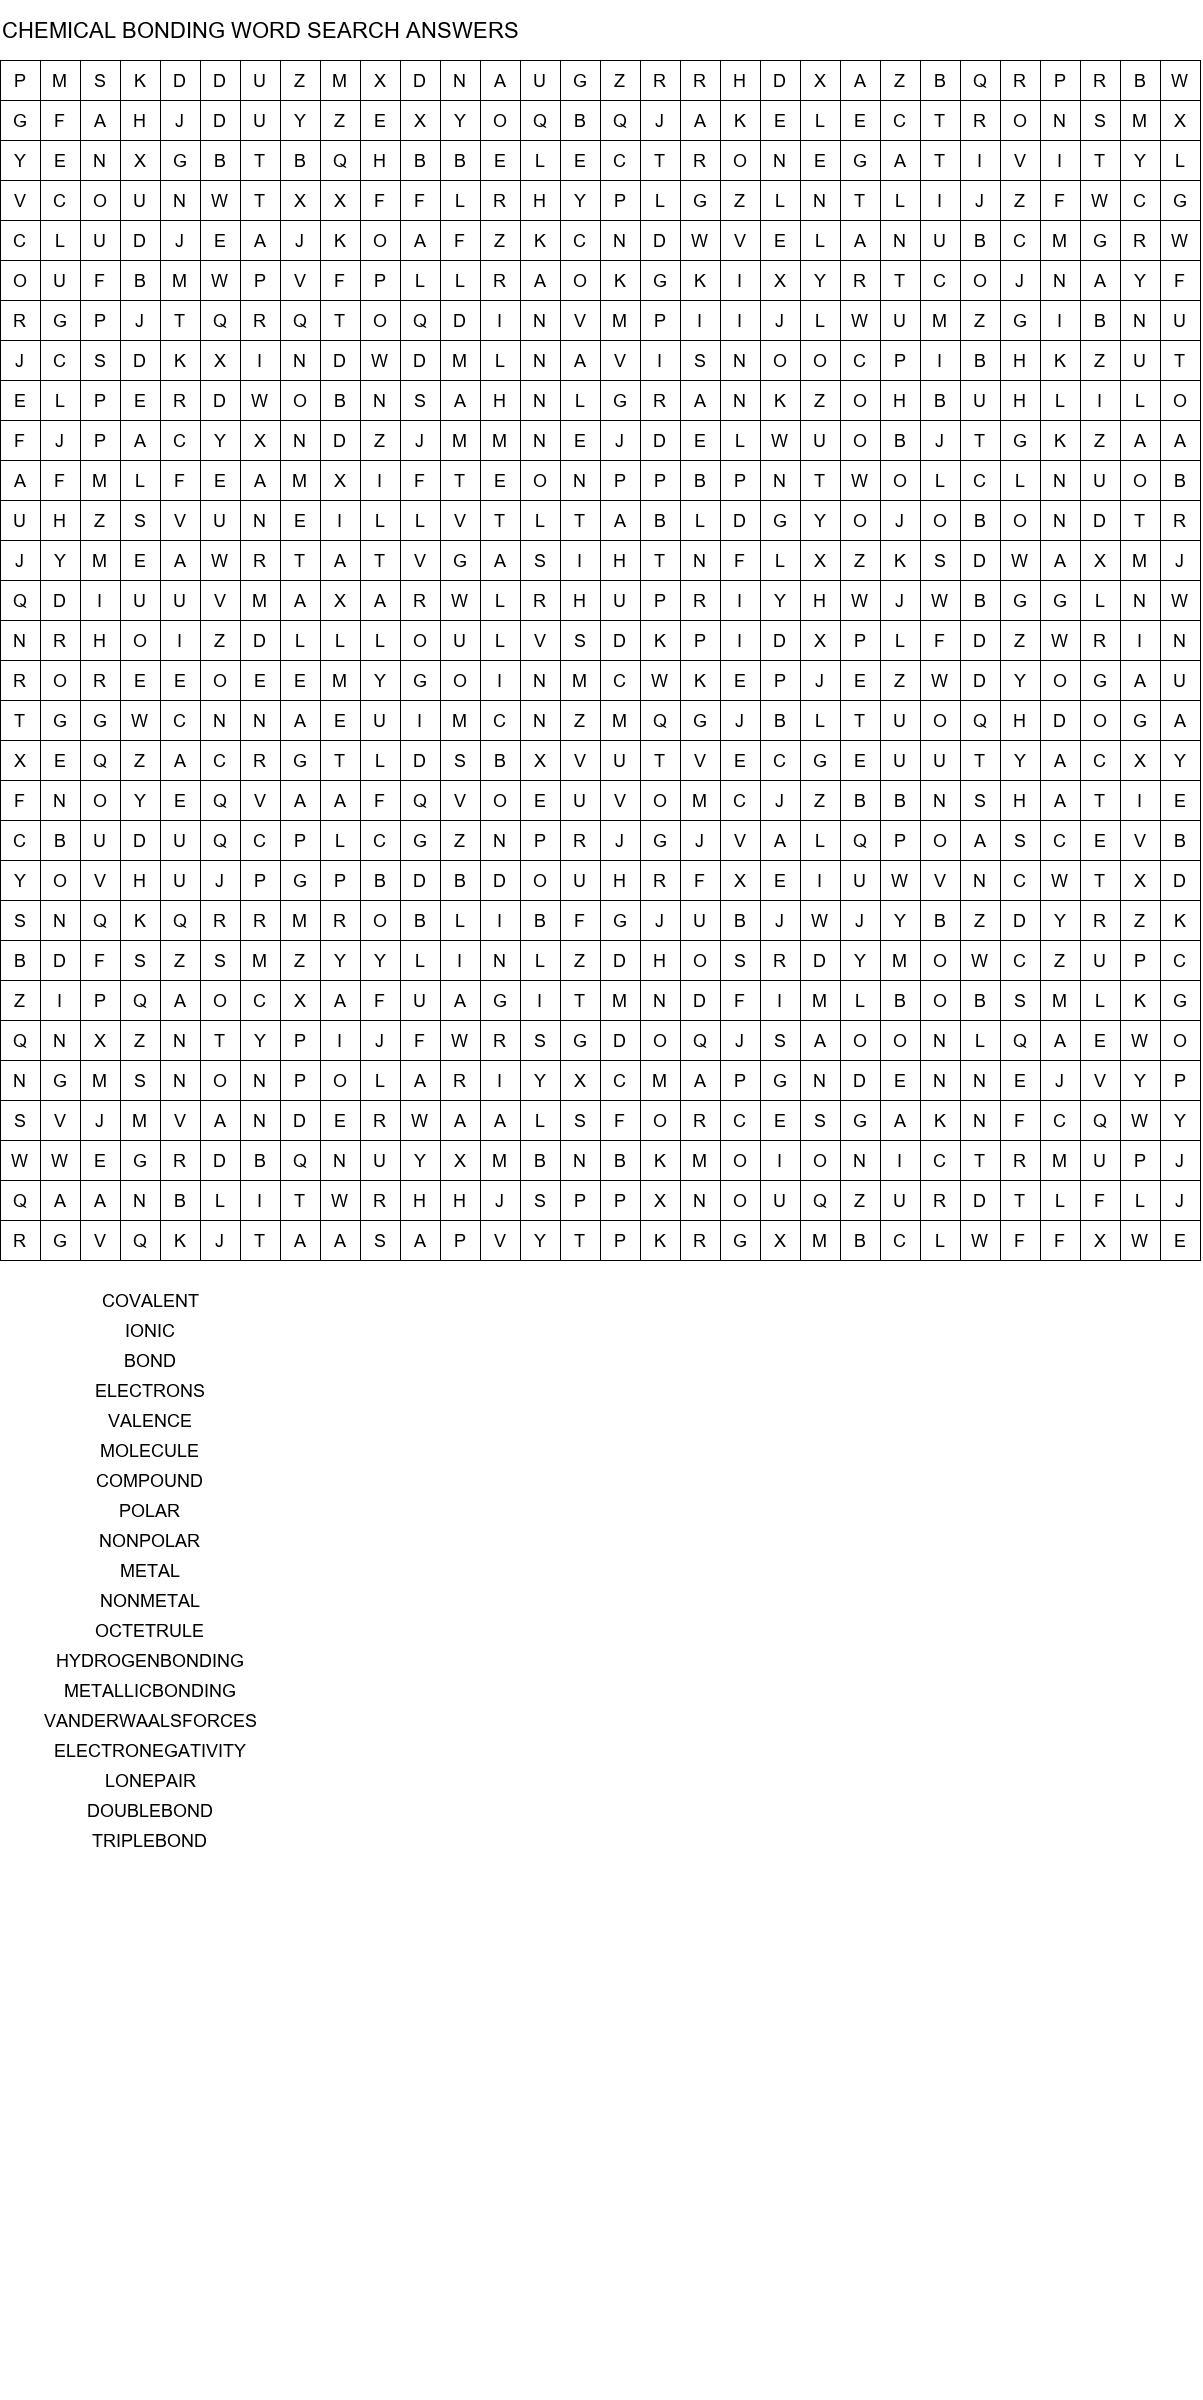 chemical bonding word search answers size 30x30